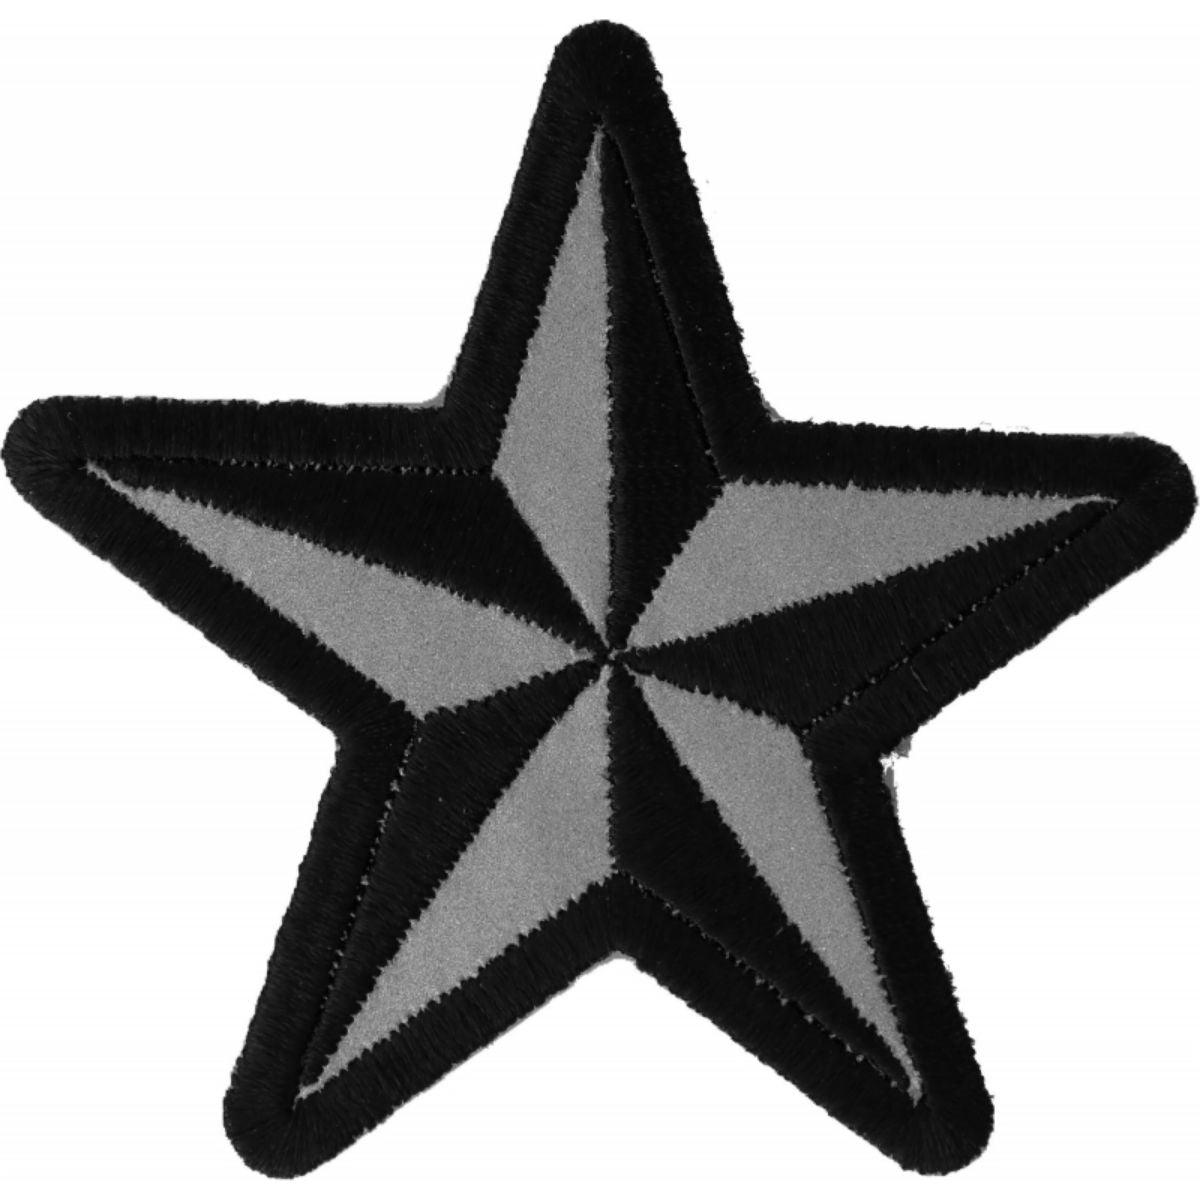 Daniel Smart Reflective Nautical Star Novelty Iron on Patch, 3 x 3 inches - American Legend Rider